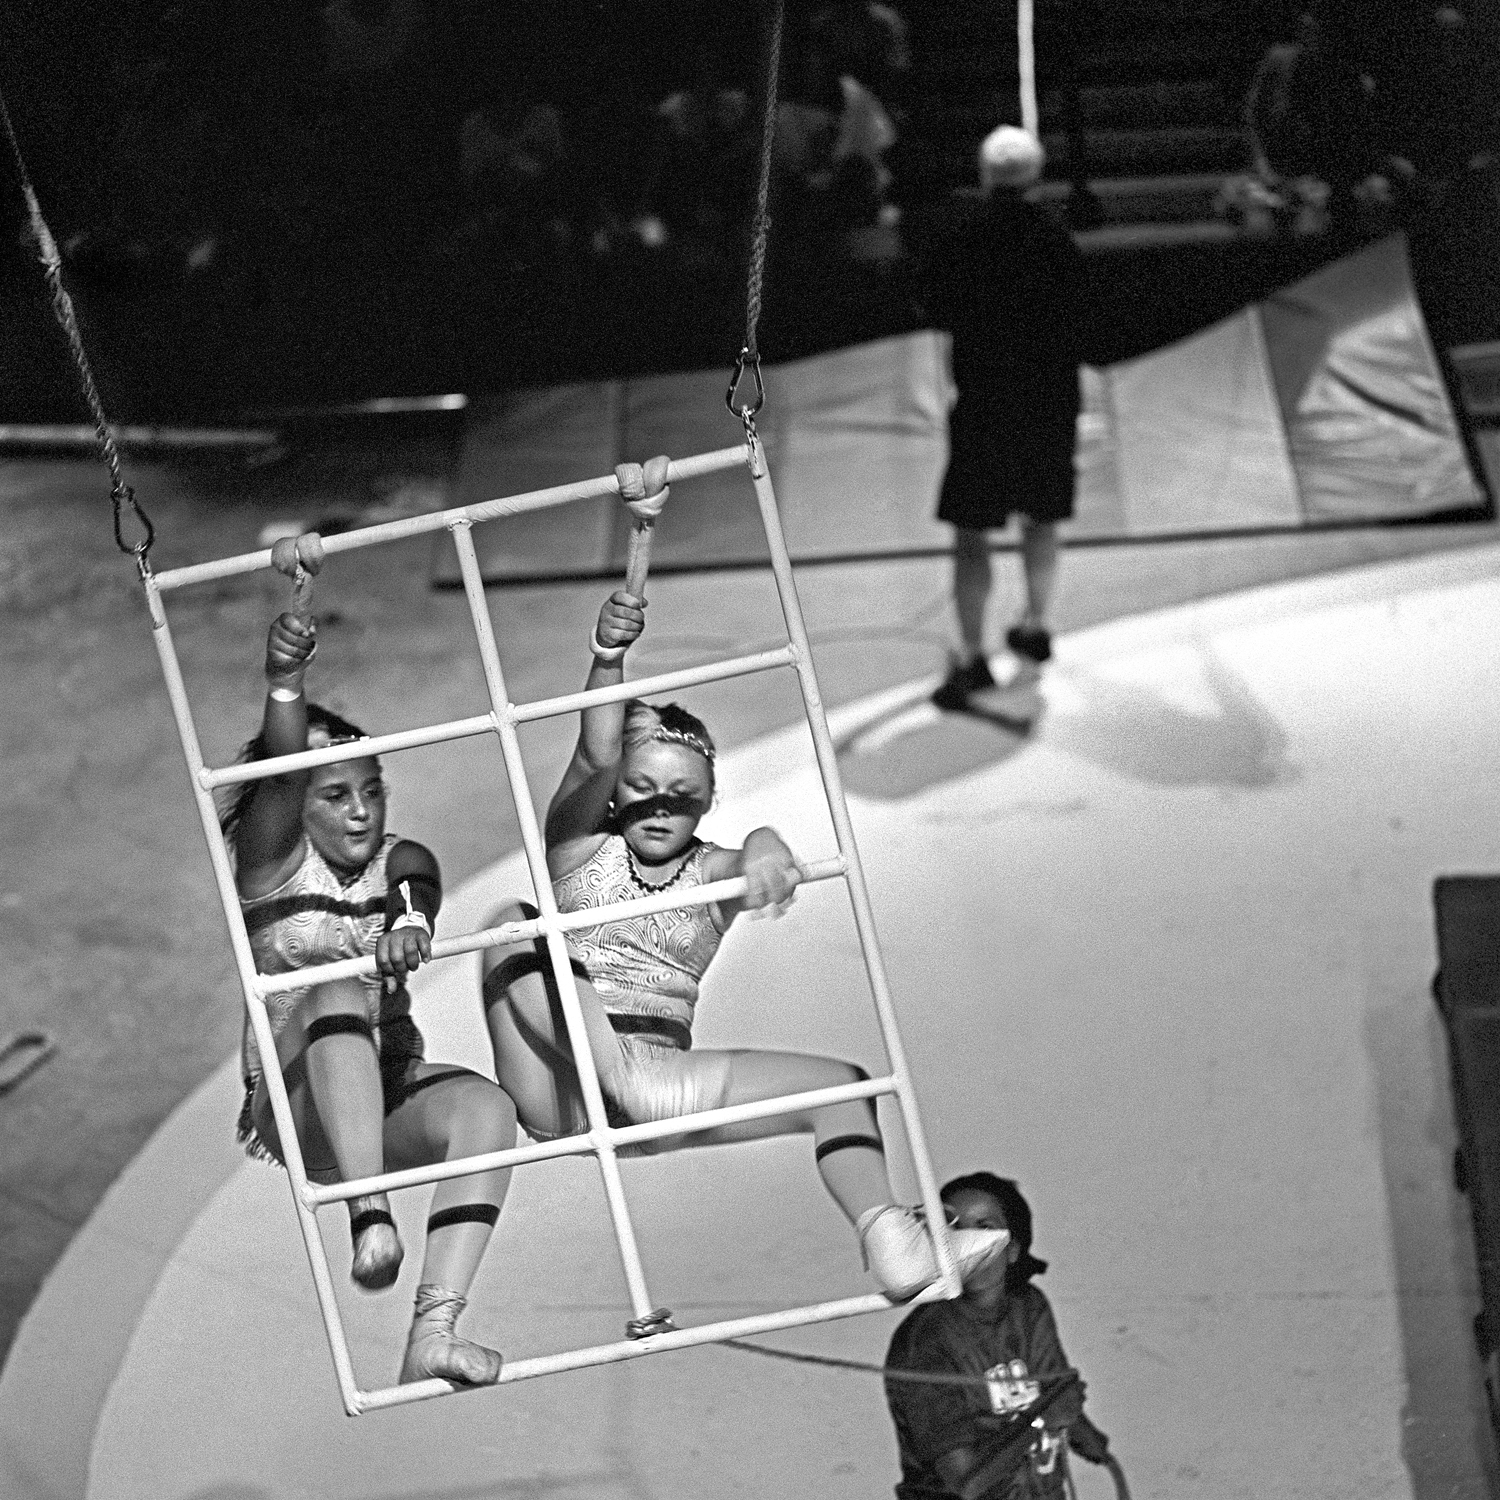 Swinging ladders is an act performed by 8-10 year olds. Spotters control the speed of the swing and keep close watch over the young performers.